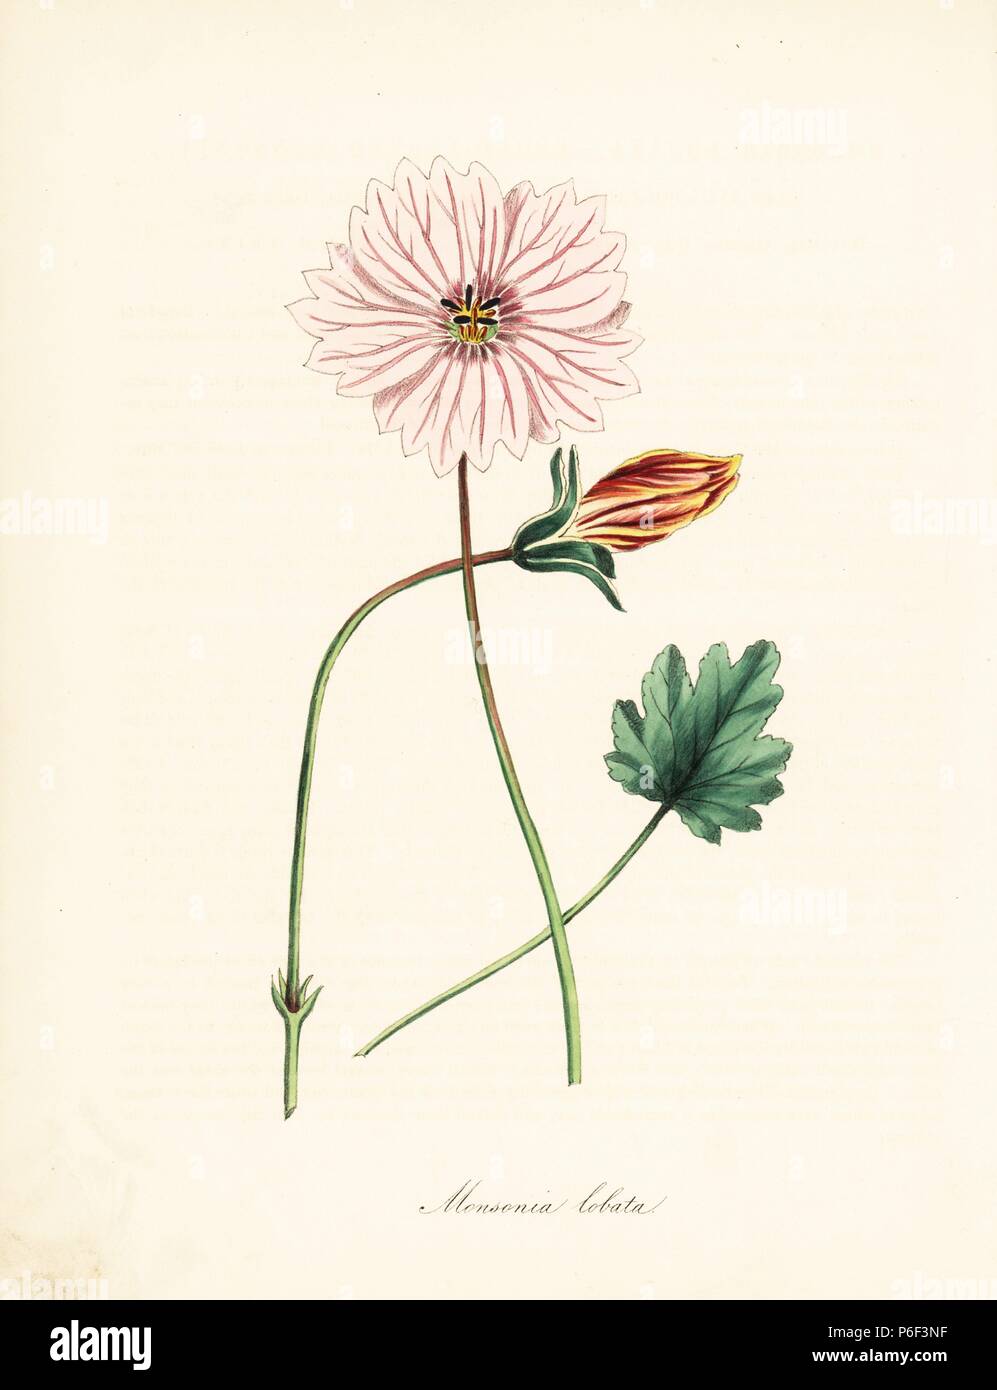 Broad-leaved monsonia, Monsonia lobata. Taken from an illustration in William Curtis' 'Botanical Magazine.' Handcoloured zincograph by C. Chabot drawn by Miss M. A. Burnett from her 'Plantae Utiliores: or Illustrations of Useful Plants,' Whittaker, London, 1842. Miss Burnett drew the botanical illustrations, but the text was chiefly by her late brother, British botanist Gilbert Thomas Burnett (1800-1835). Stock Photo